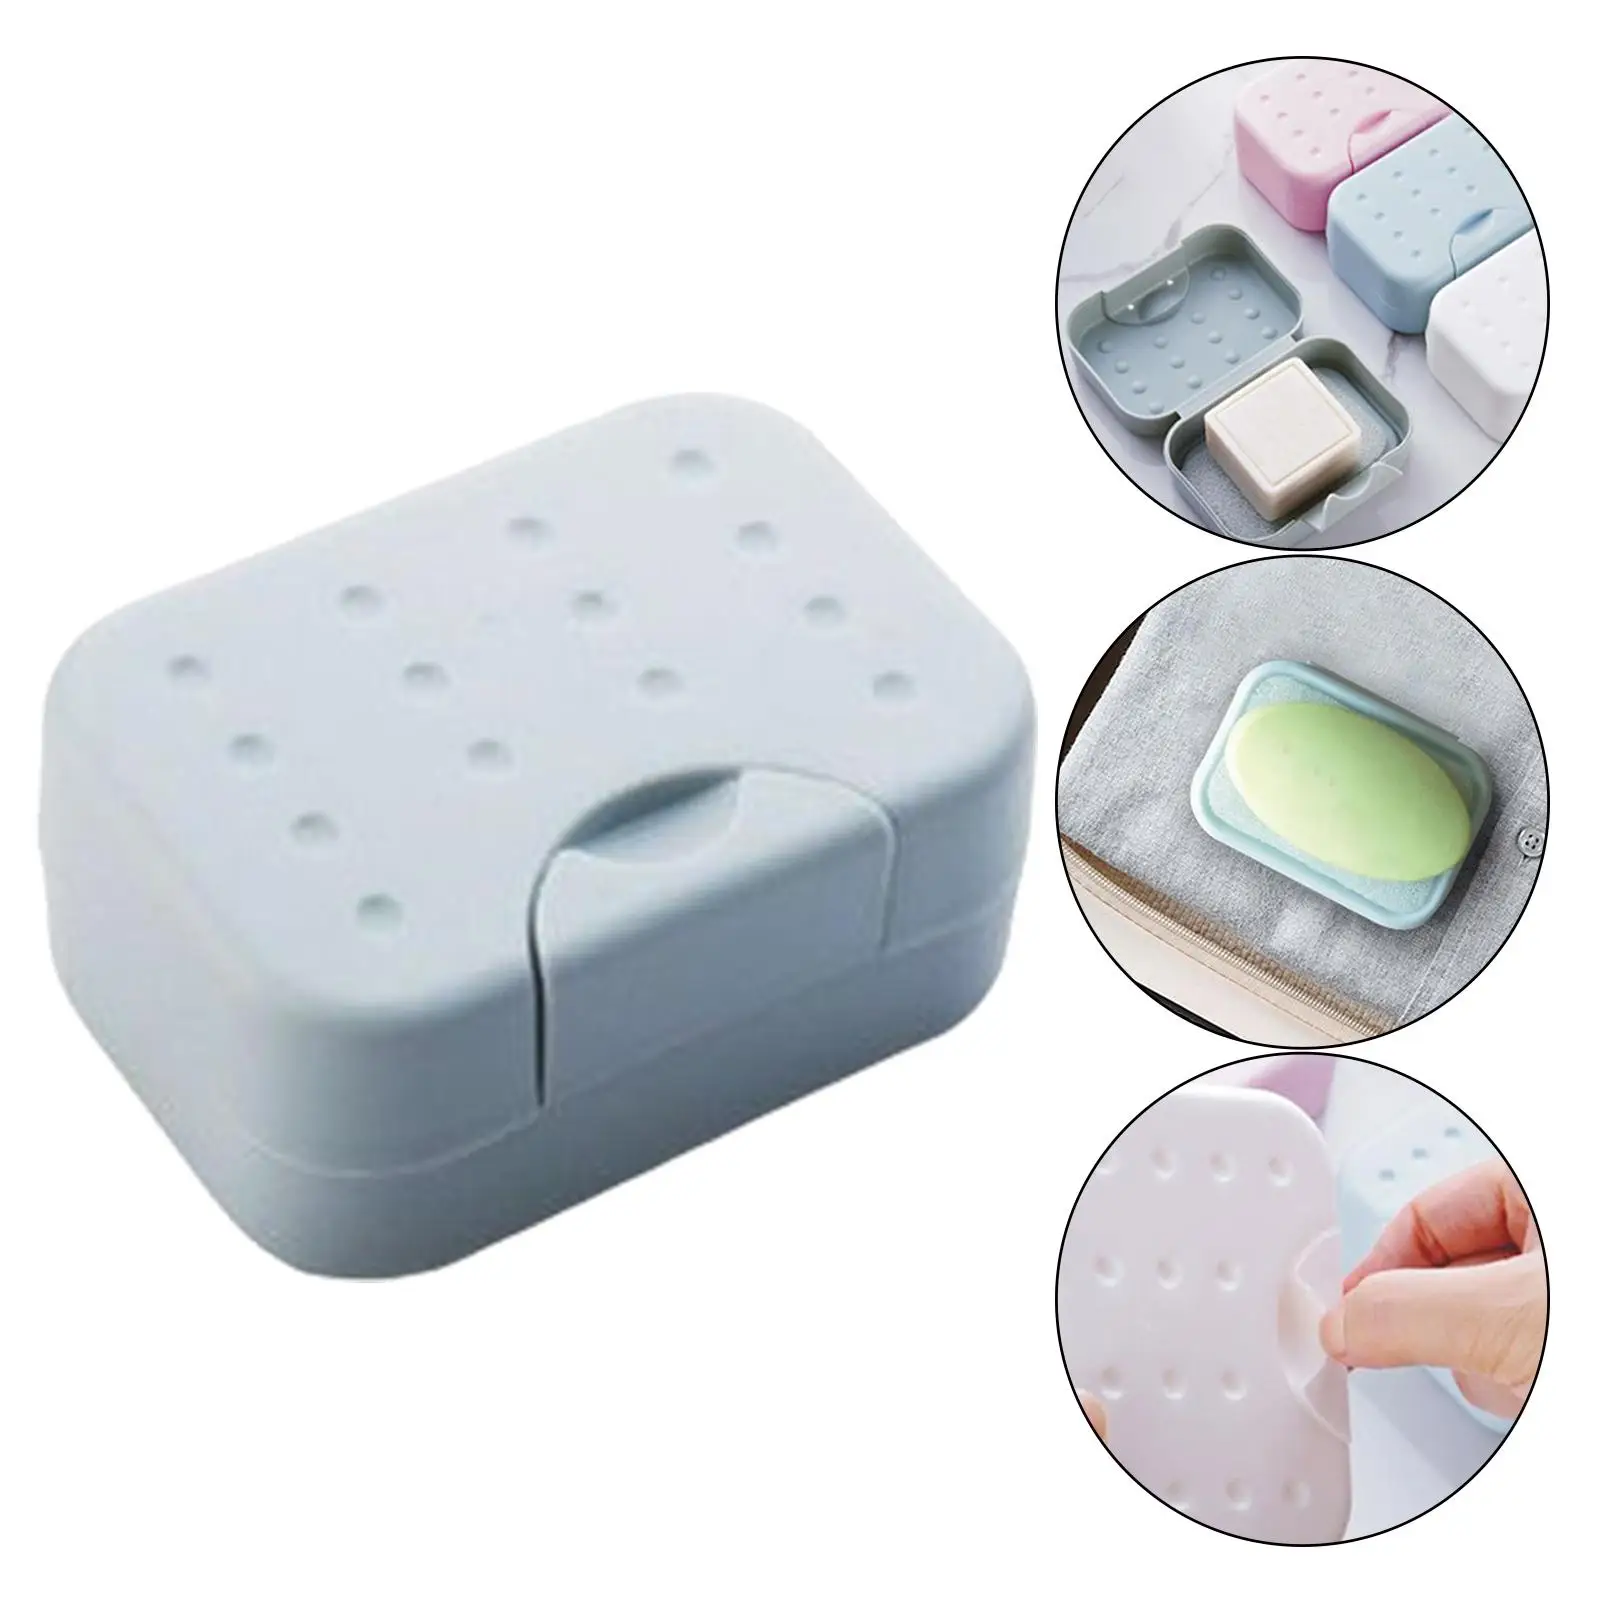 Portable Travel Soap Box Case Dish Container Soap Bar Holder for Hiking Bathroom Strong Sealing Leakproof with Sponge Saver